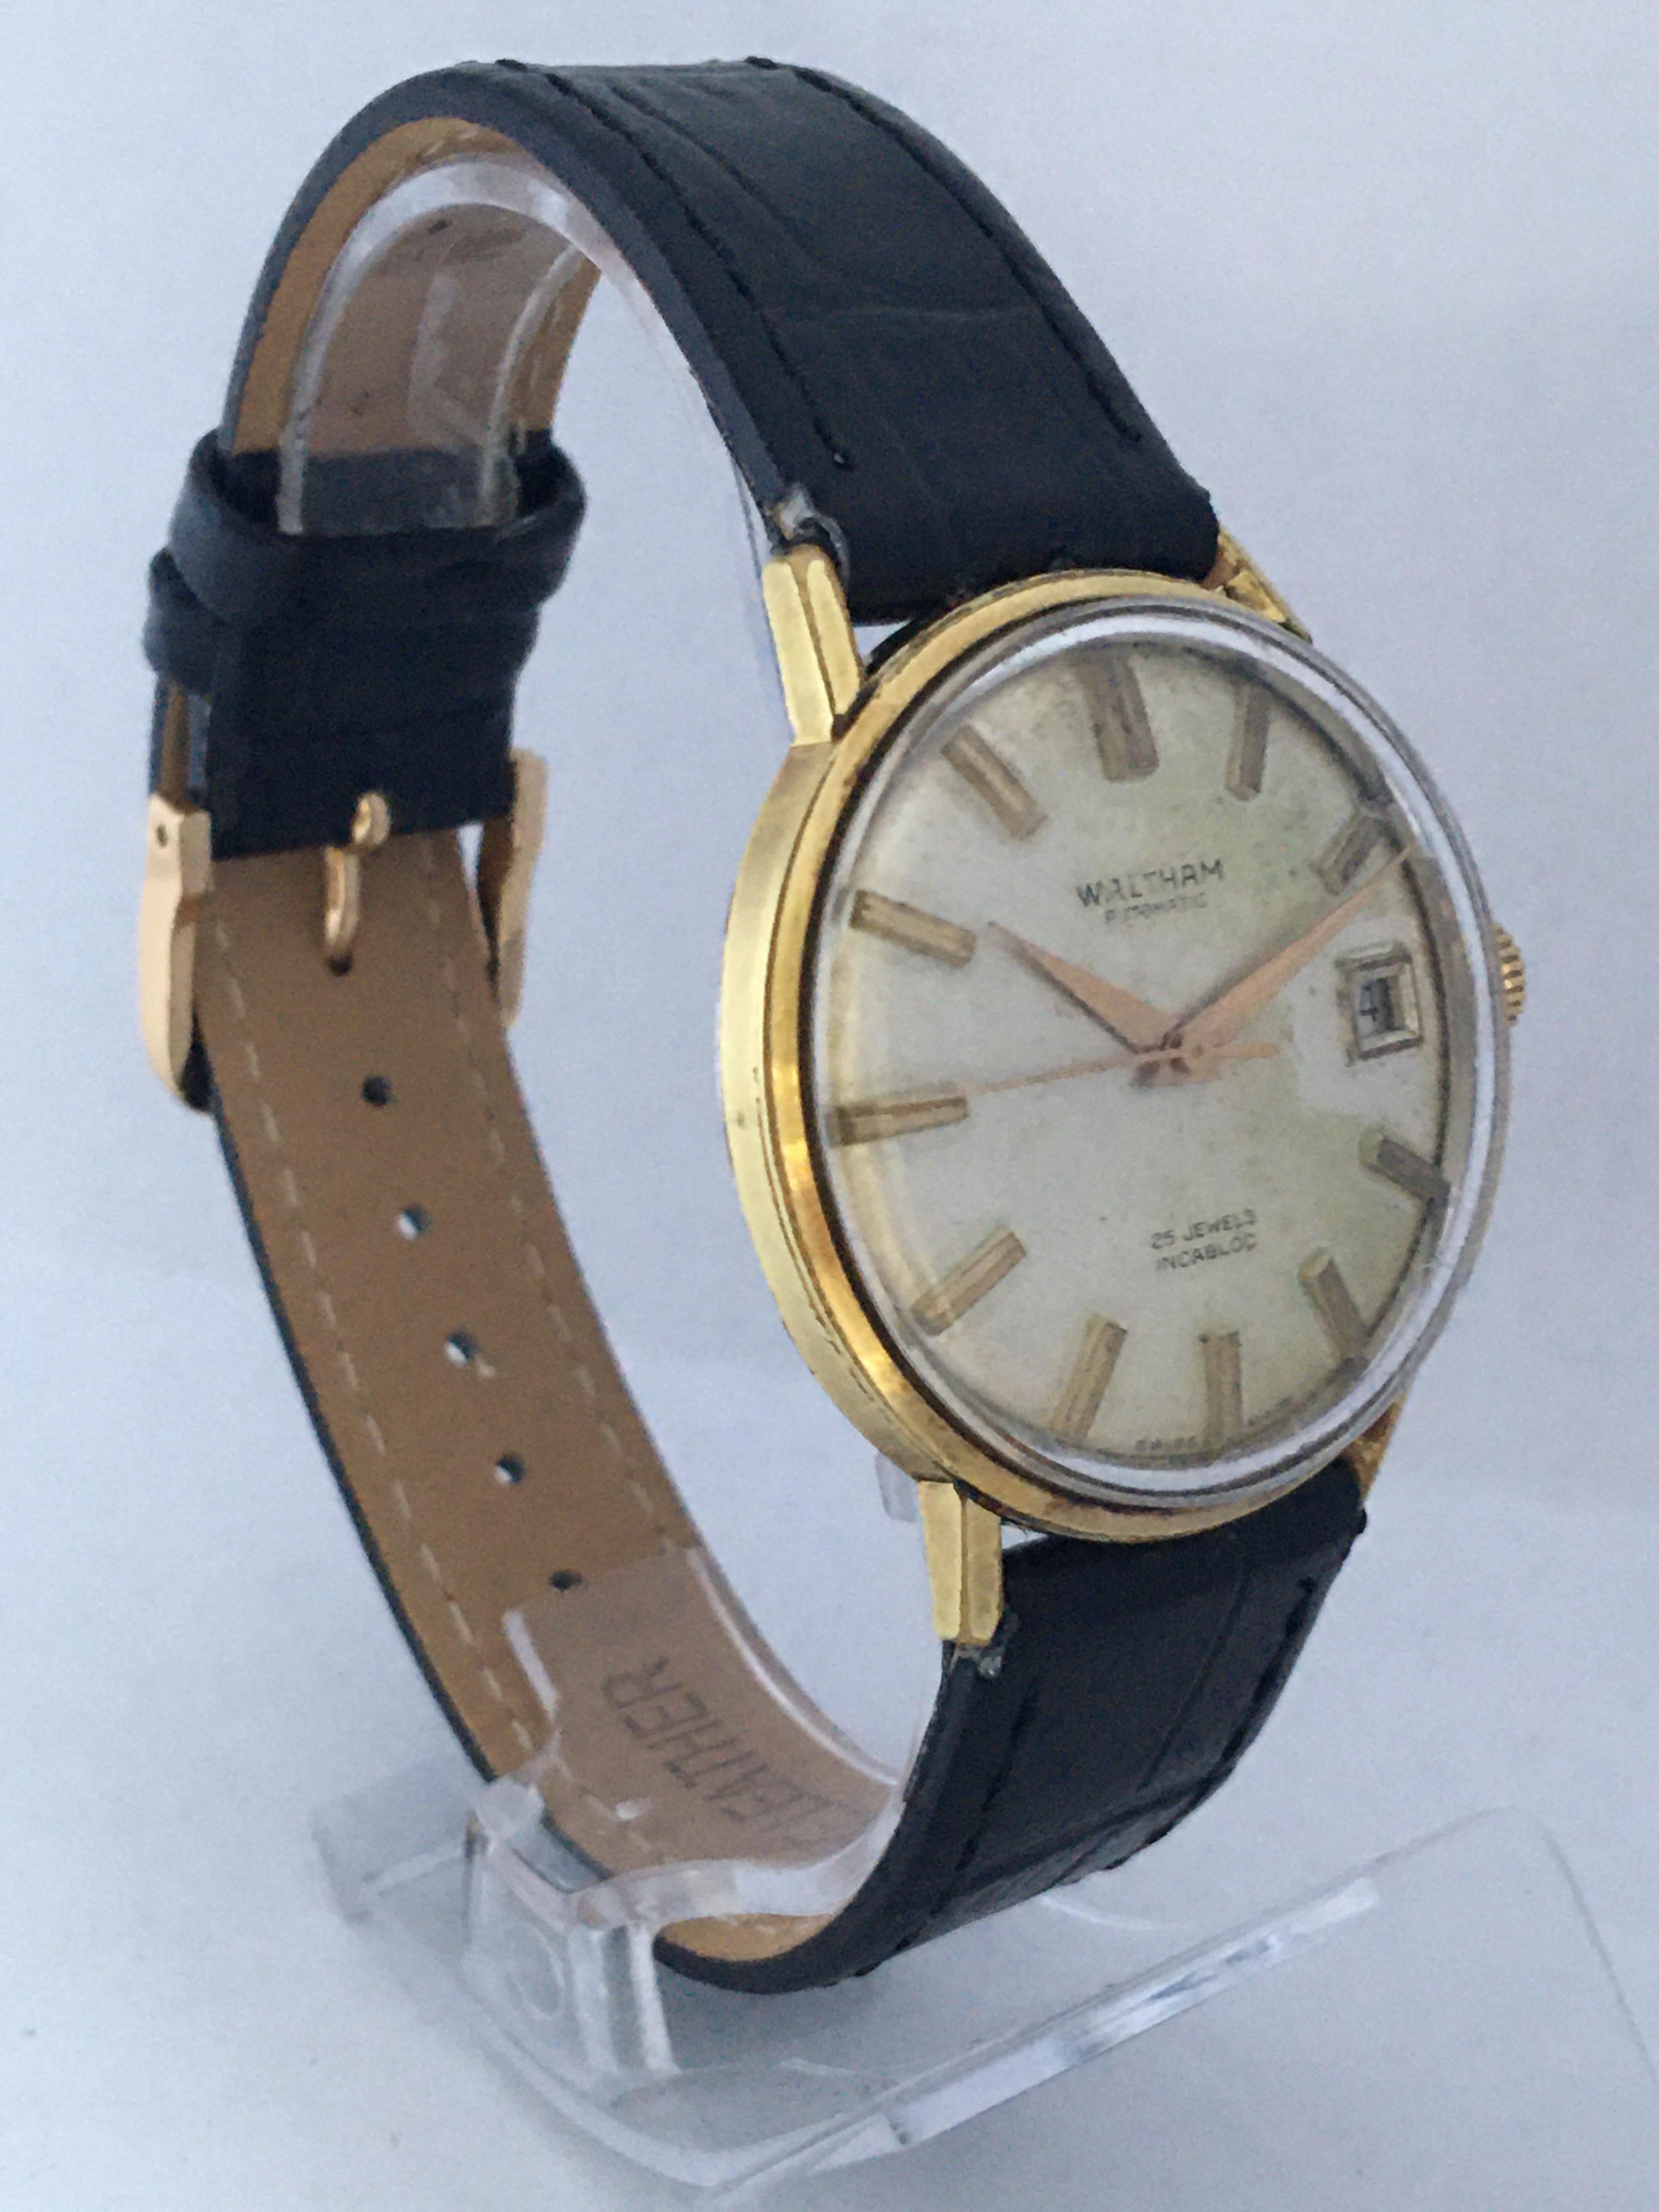 This pre-owned 34mm diameter vintage 25 Jewels automatic watch is in good working condition and it is running well. It has recently been serviced. Visible signs of ageing and wear with some scratches on the glass and on the watch case as shown. Also